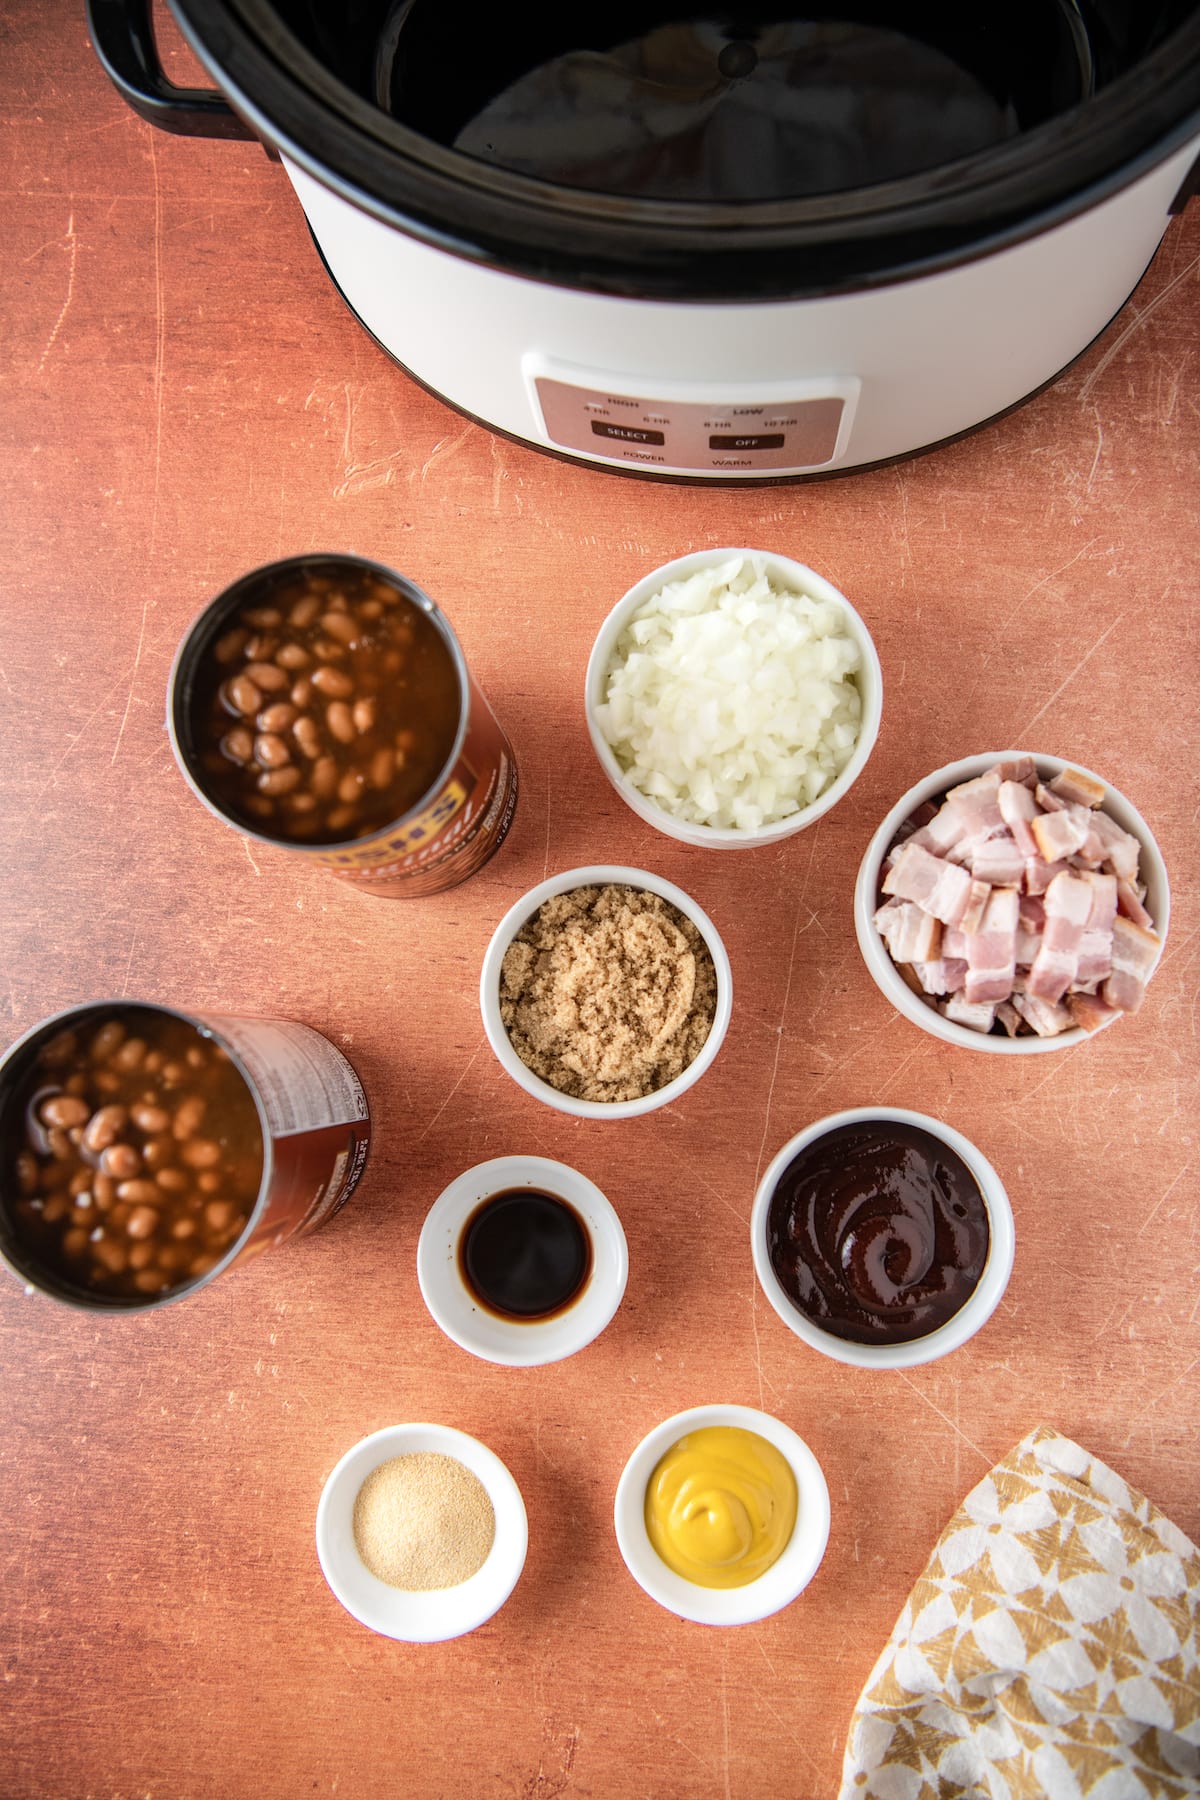 ingredients to make baked beans like canned beans, onions, bacon, and seasonings